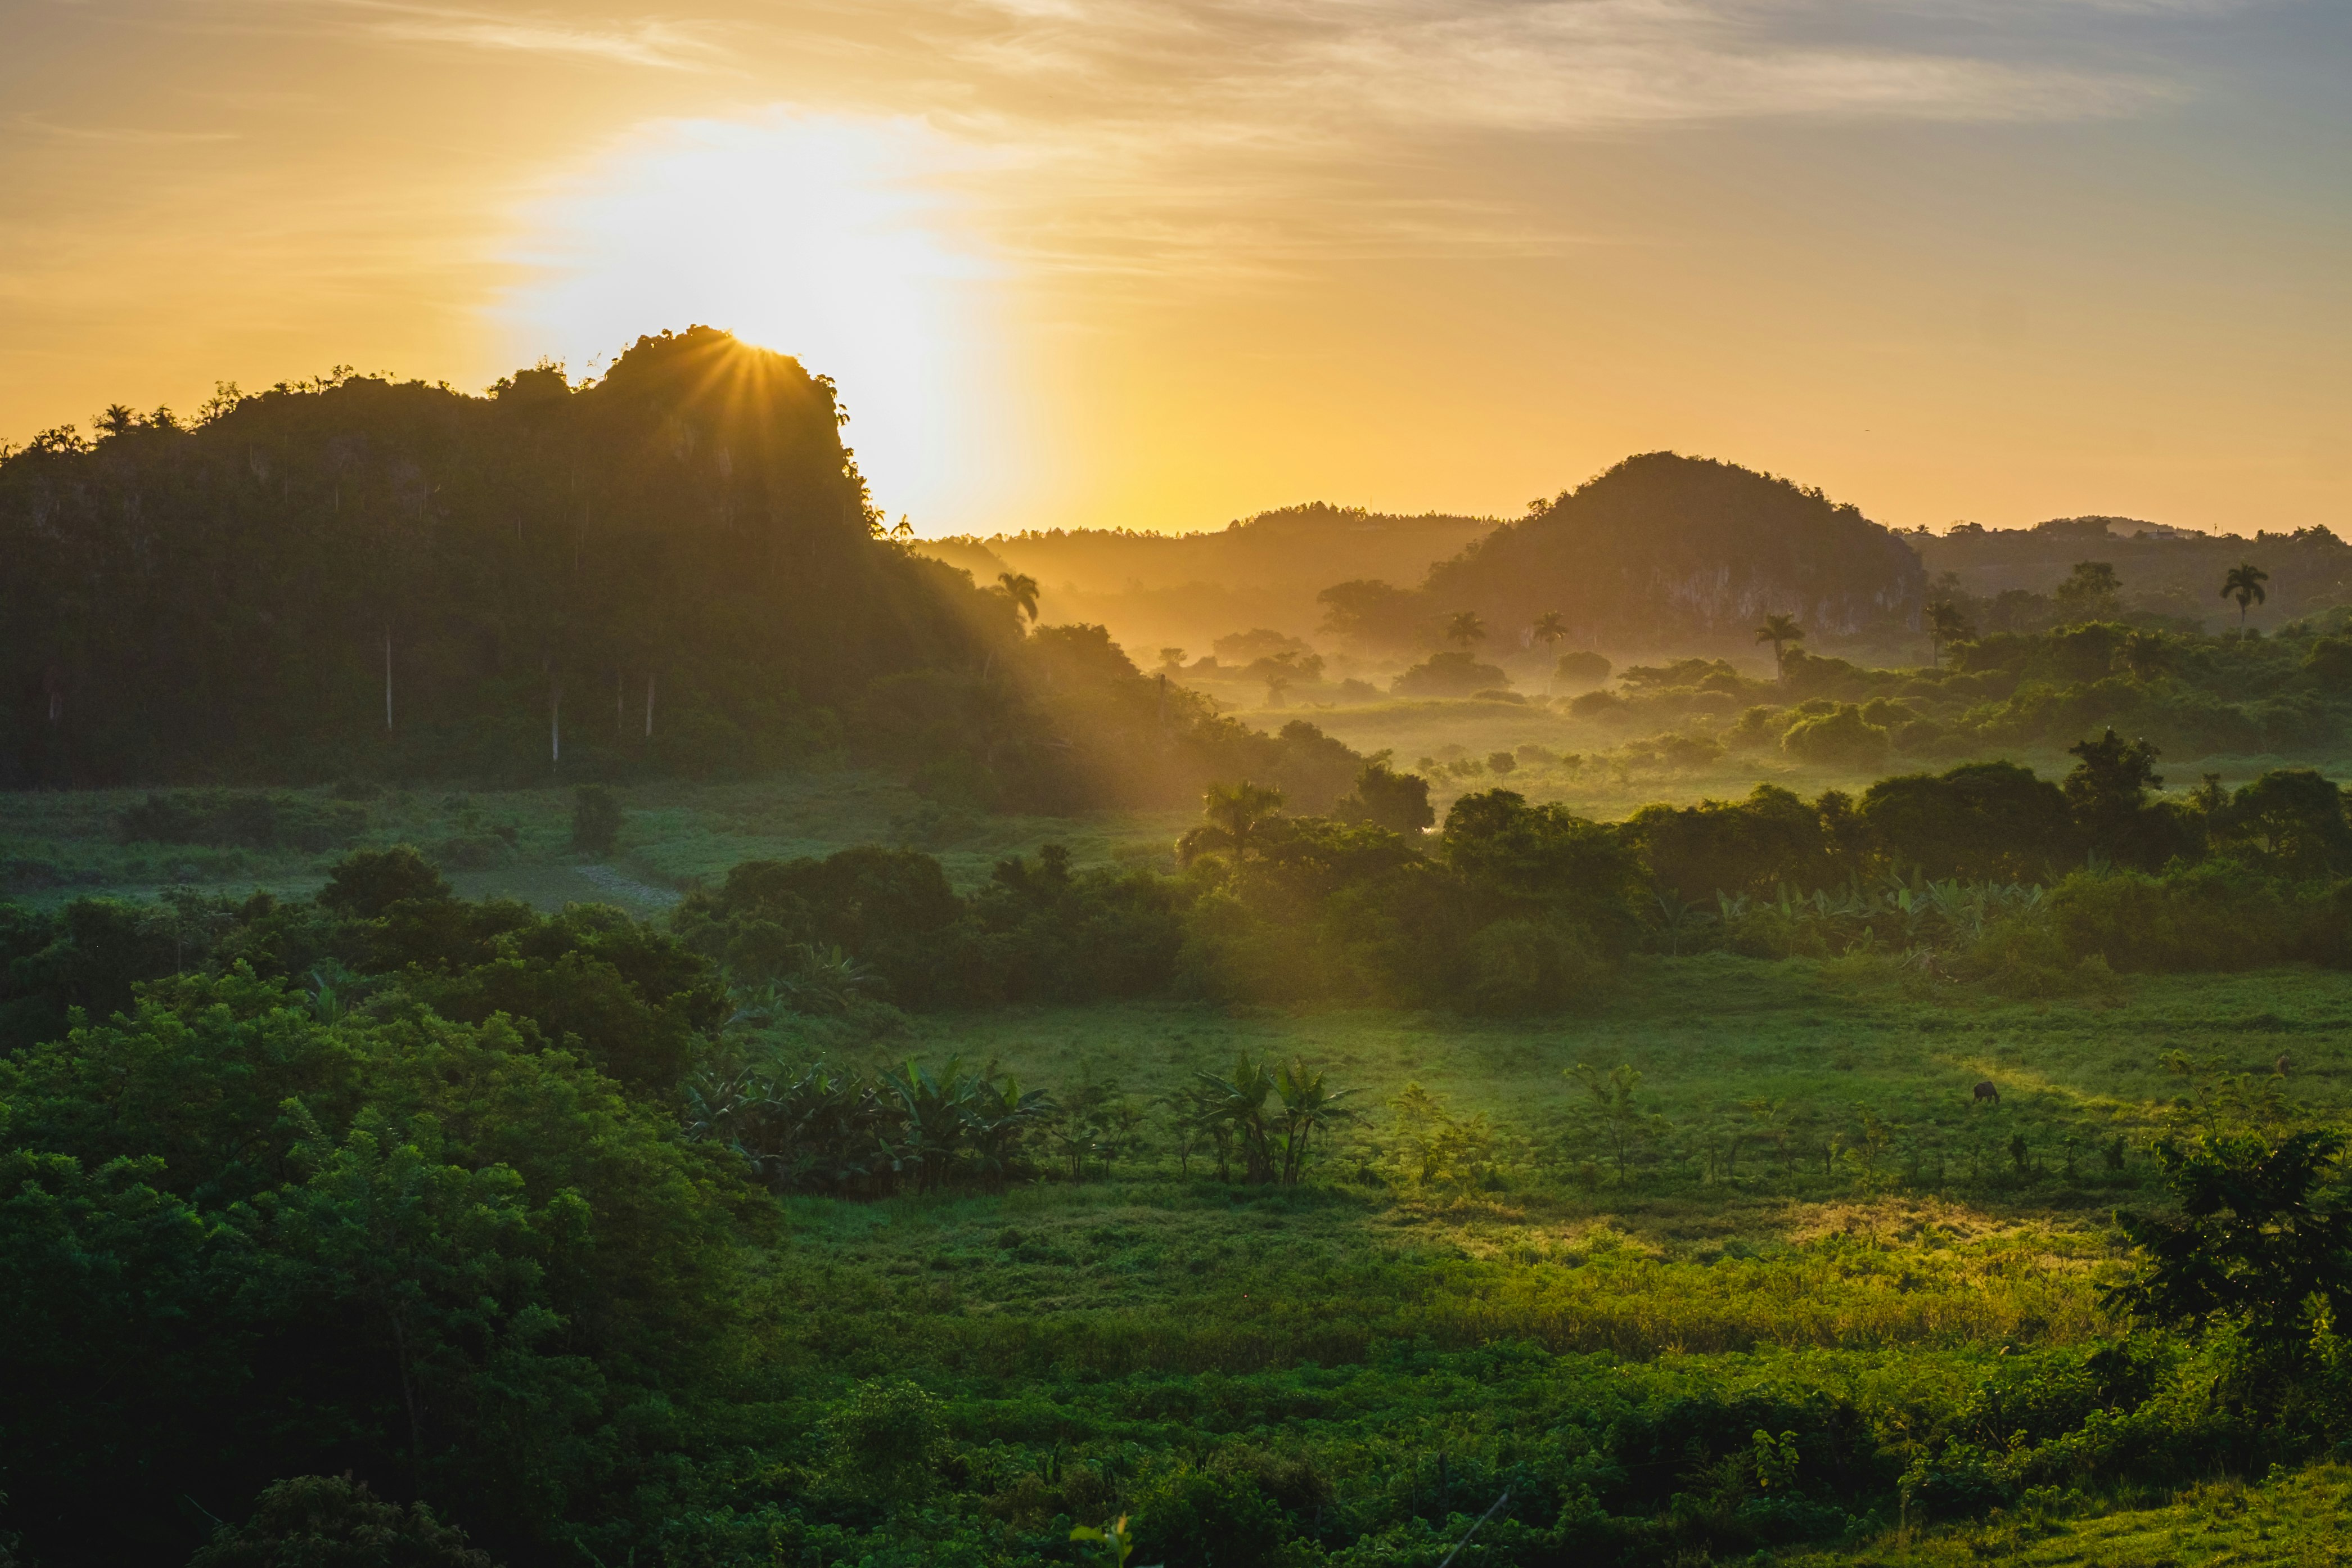 A nice guy took us horsbackriding in the early morning to watch the sun rise over the valley of Viñales. Arriving on top of a hill the first sun rays of the day illuminated the valley.